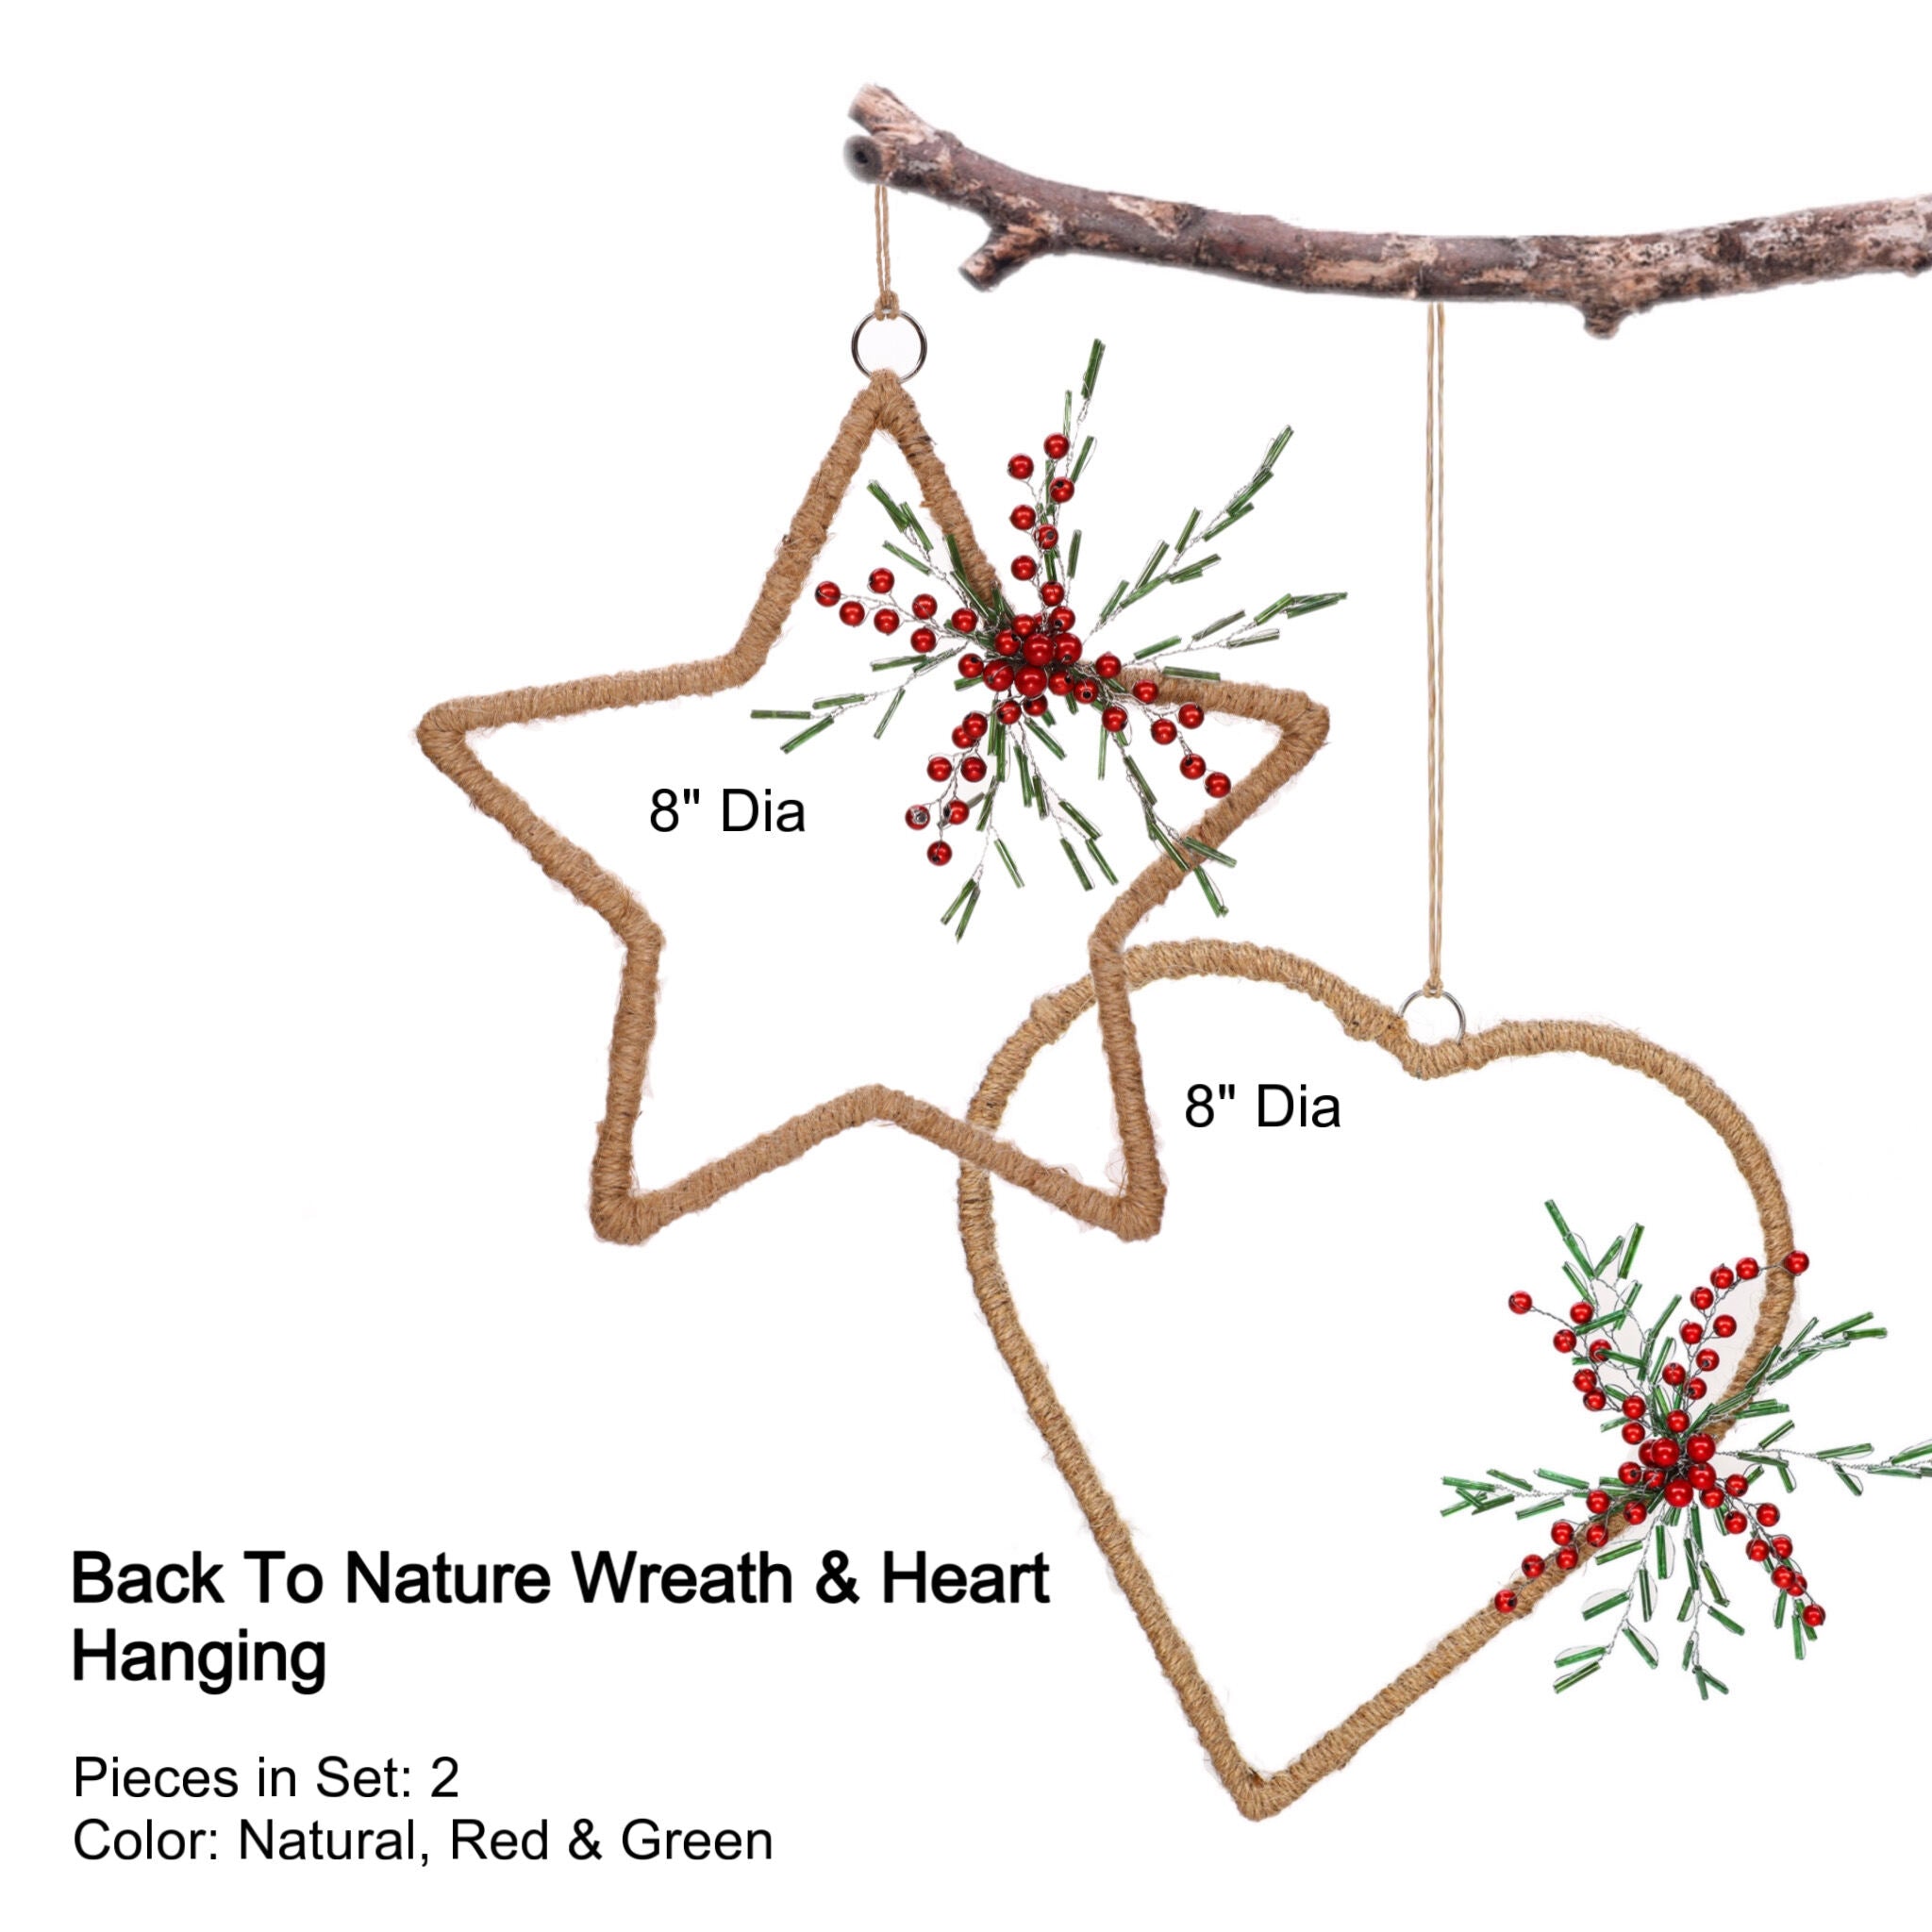 Back To Nature Wreath & Heart Hanging in Natural, Red & Green, Set of 2